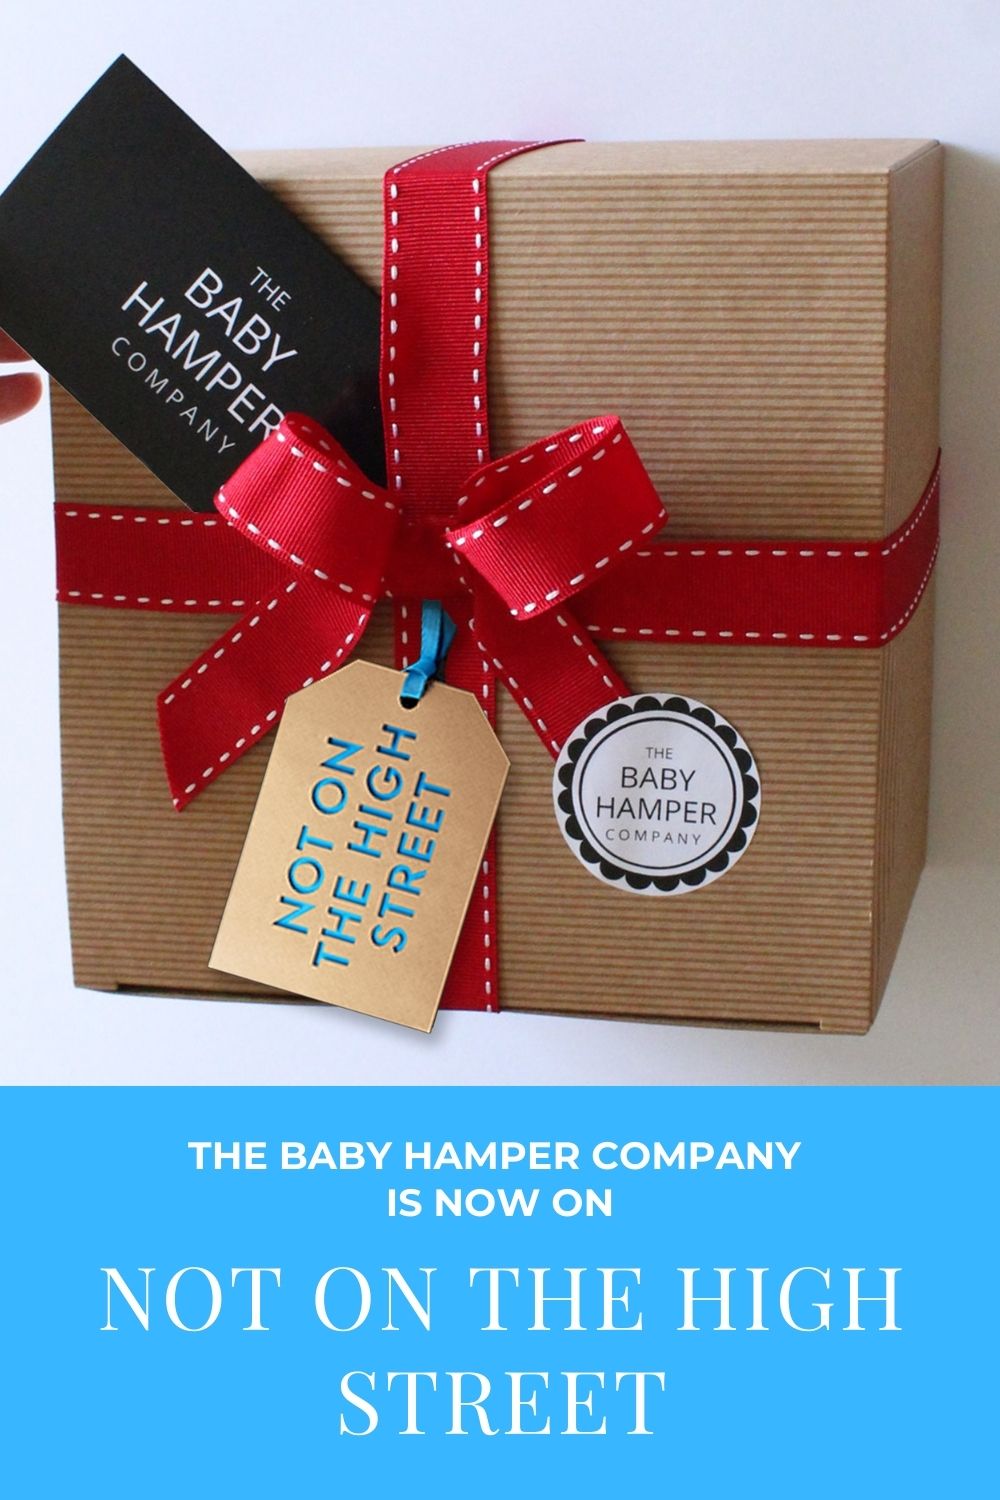 The Baby Hamper Company is now on Not On The High Street